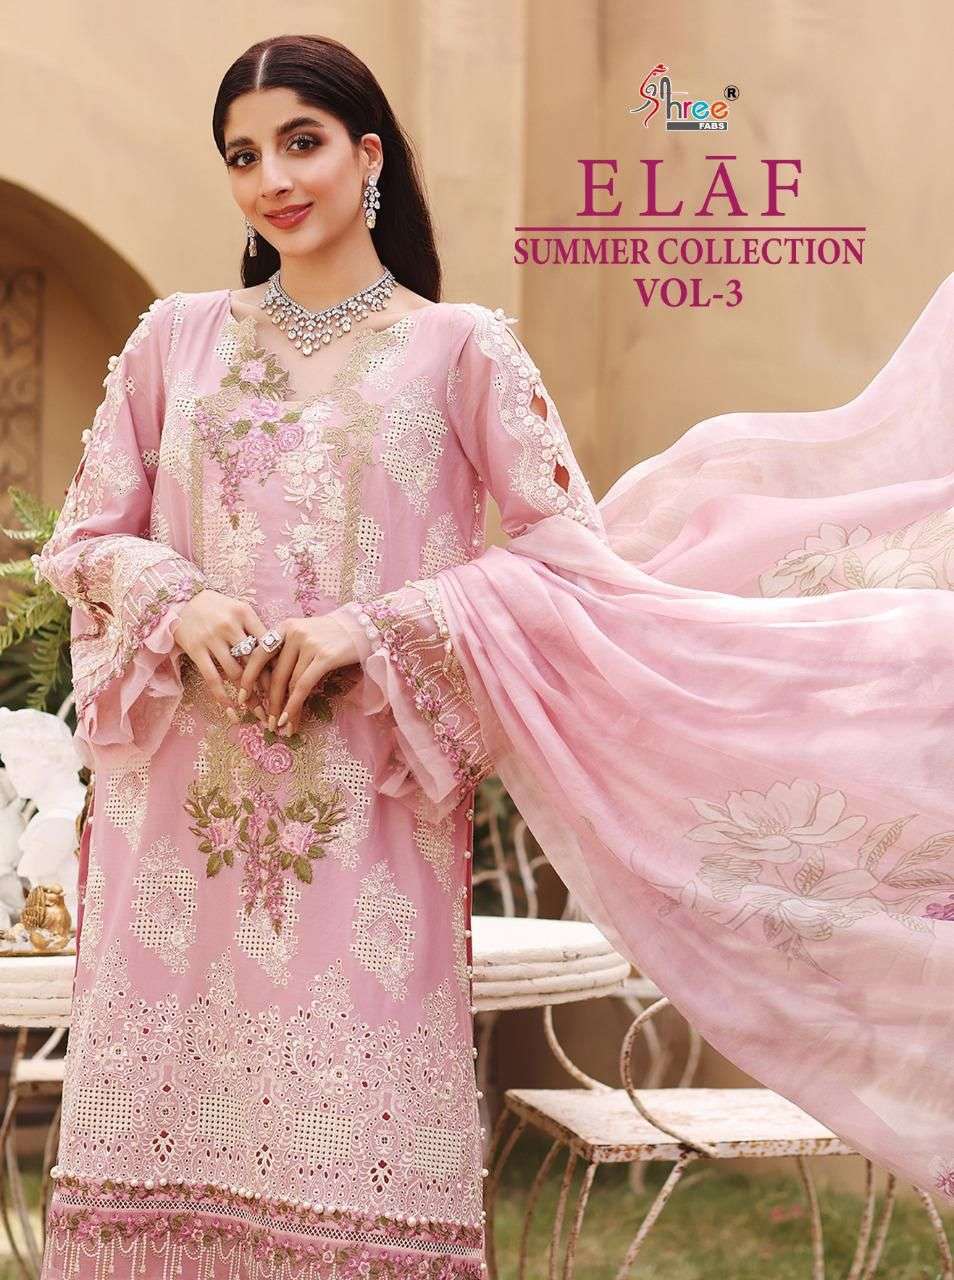 shree fabs elaf summer collection vol 3 series 2270-2274 pure cotton suit